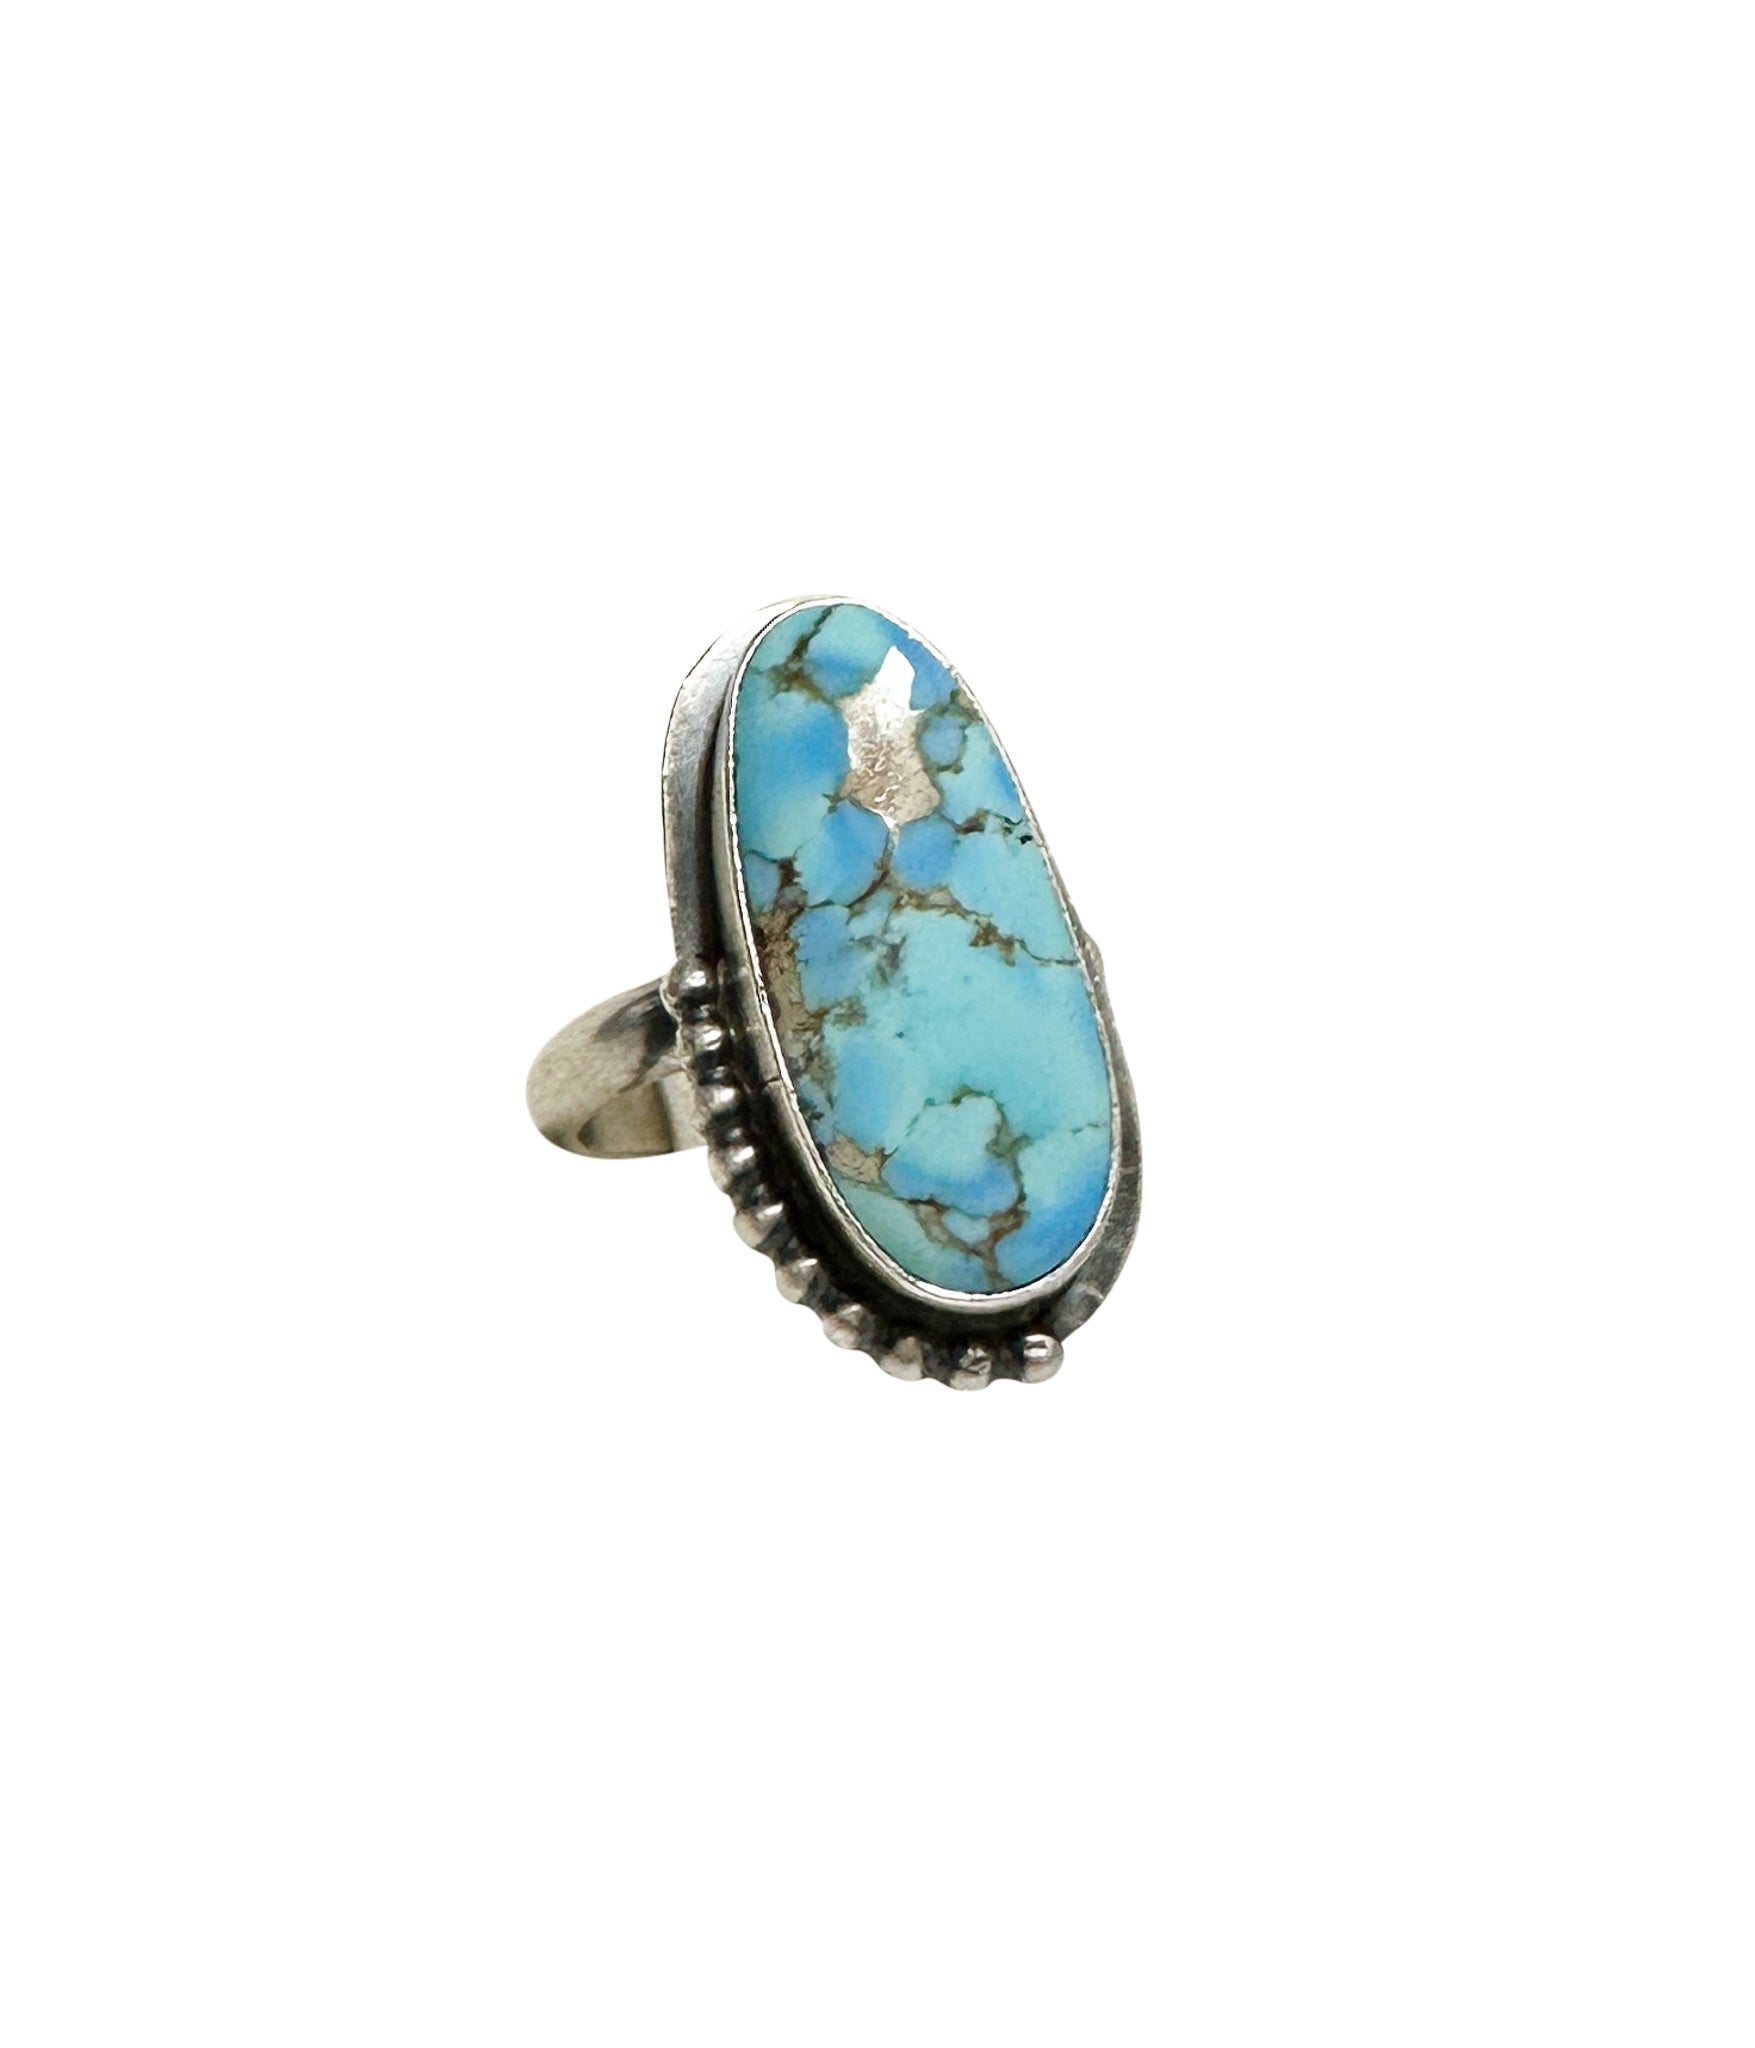 South Valley Golden Hills Turquoise Ring